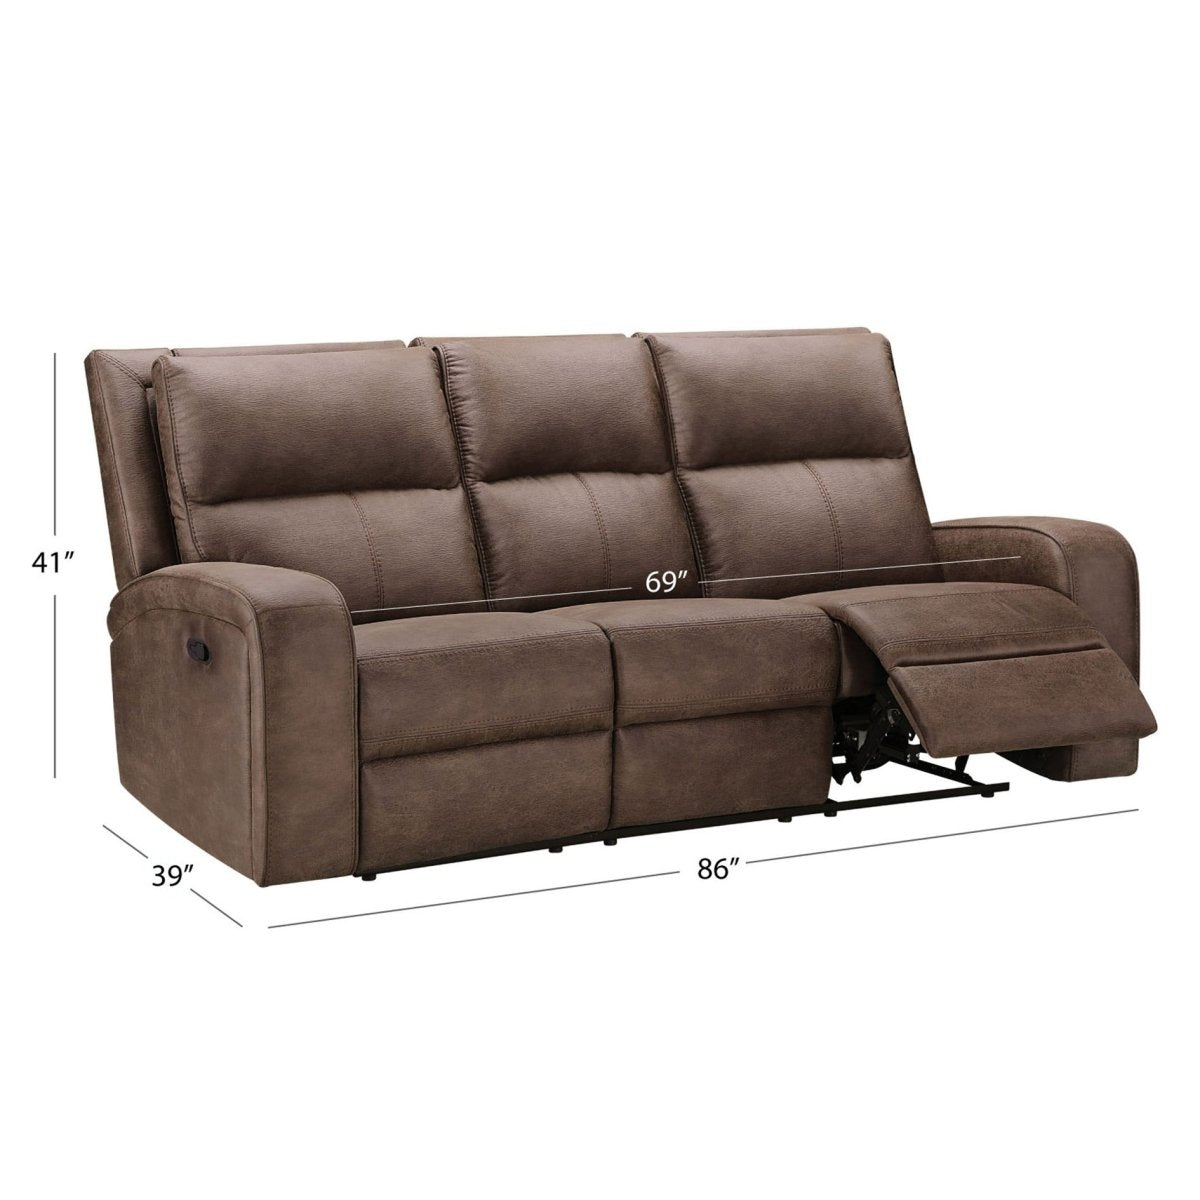 Bryce Fabric Manual Reclining Sofa - Alpine Outlets